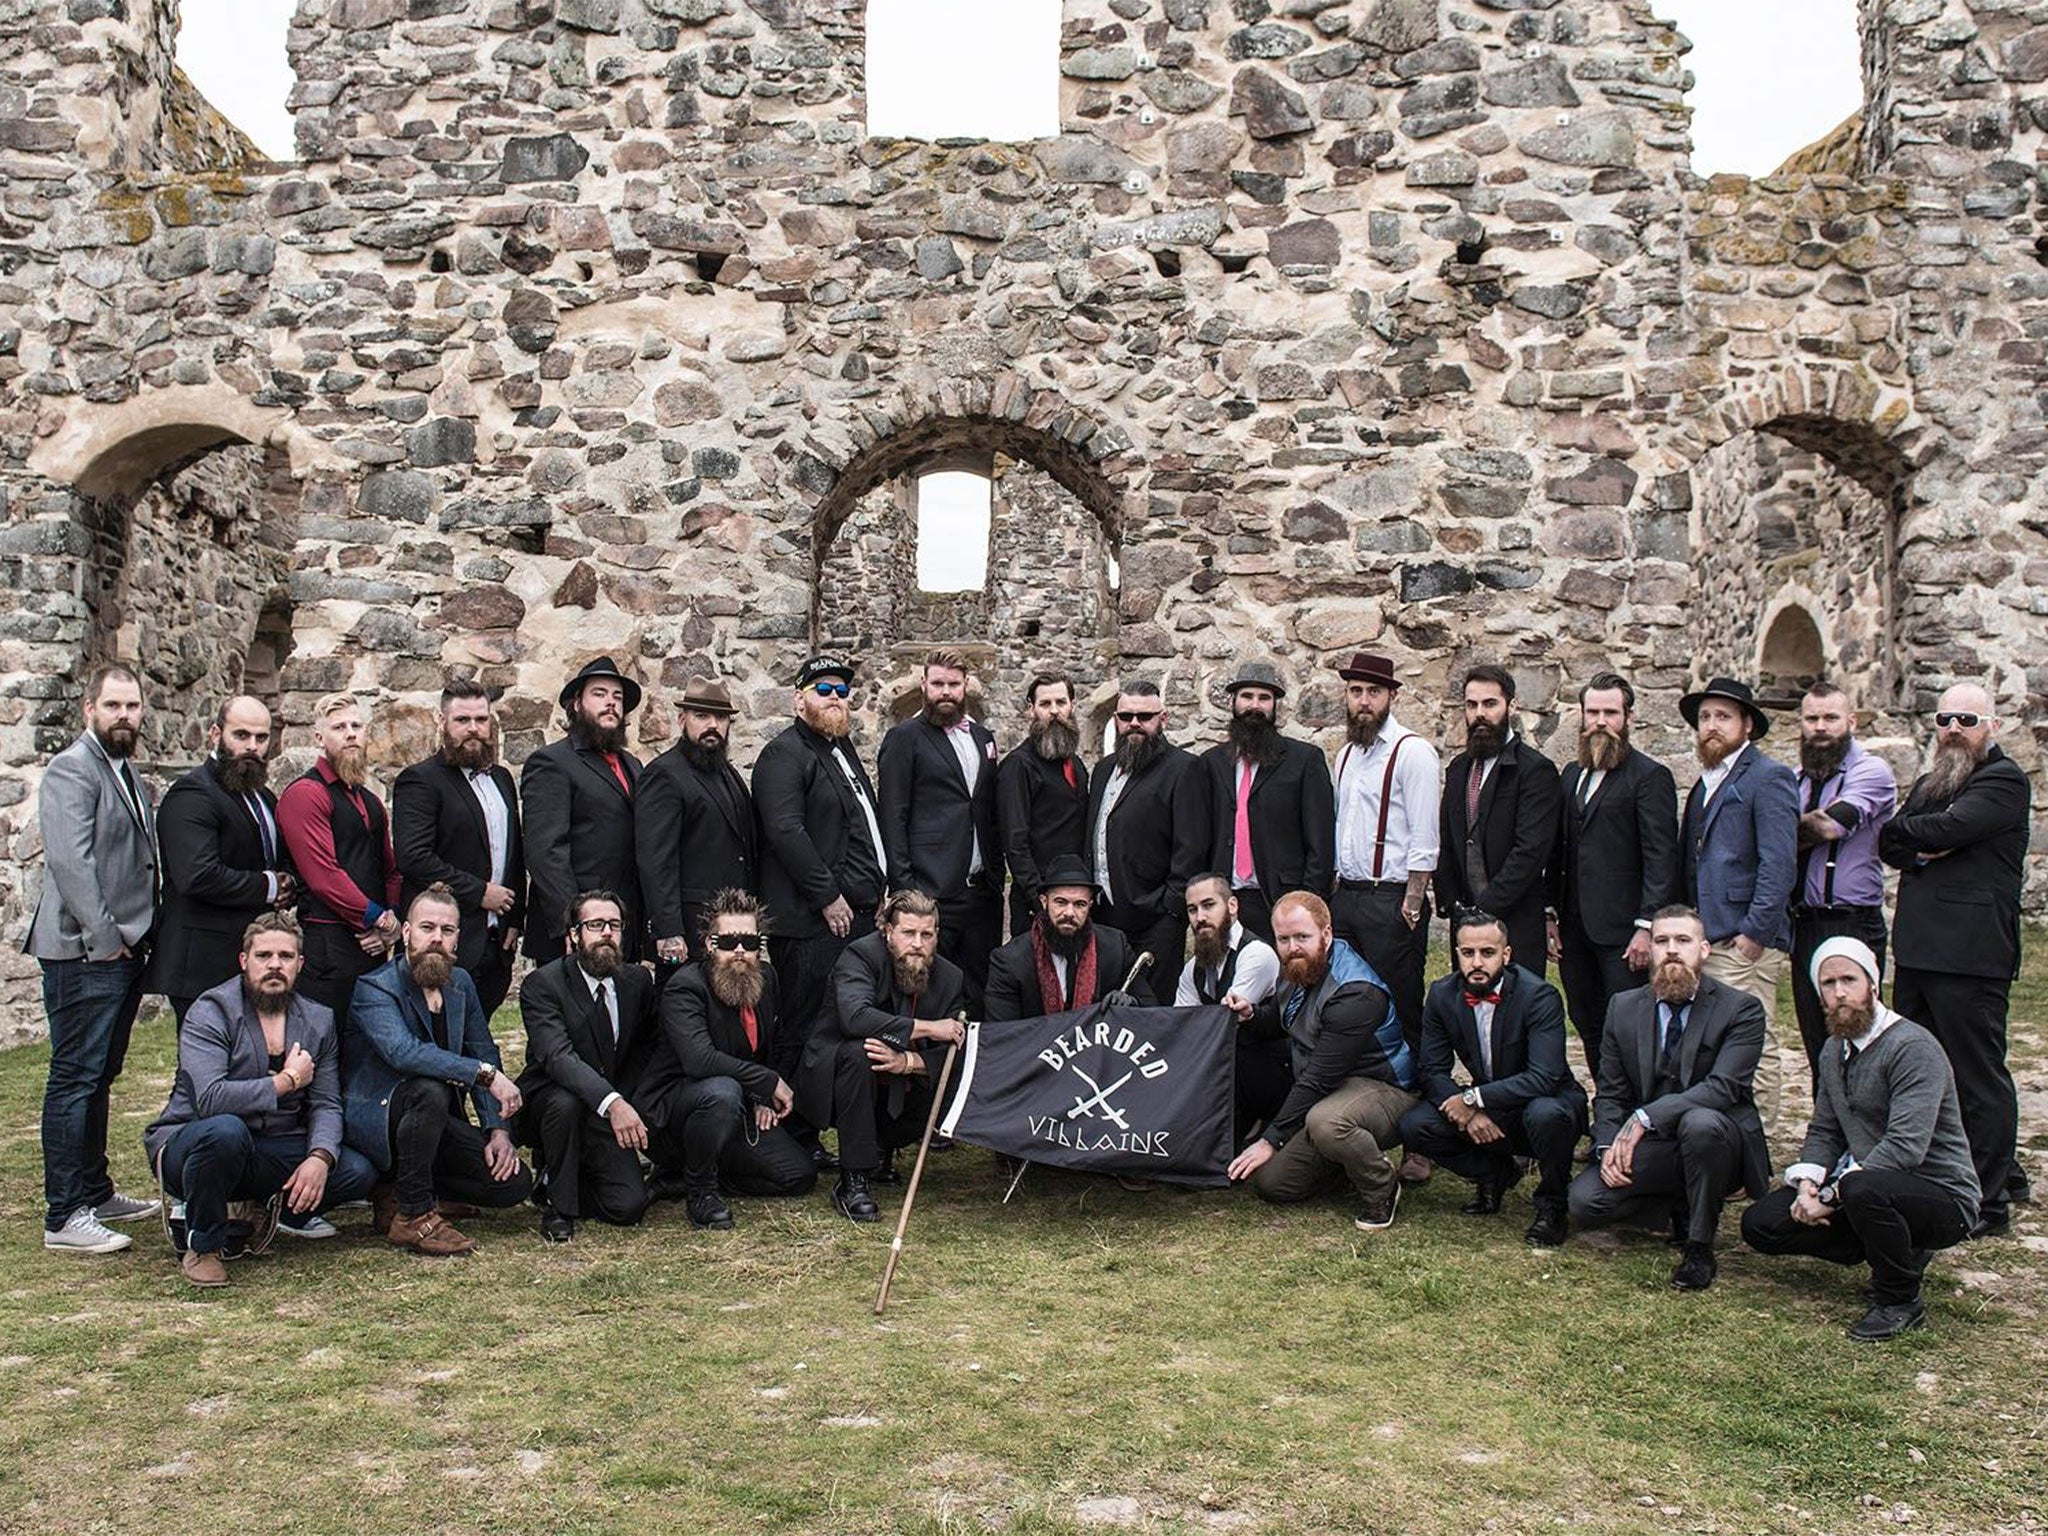 A picture taken for the photoshoot of the Bearded Villains in Sweden, who were mistaken for Isis terrorists